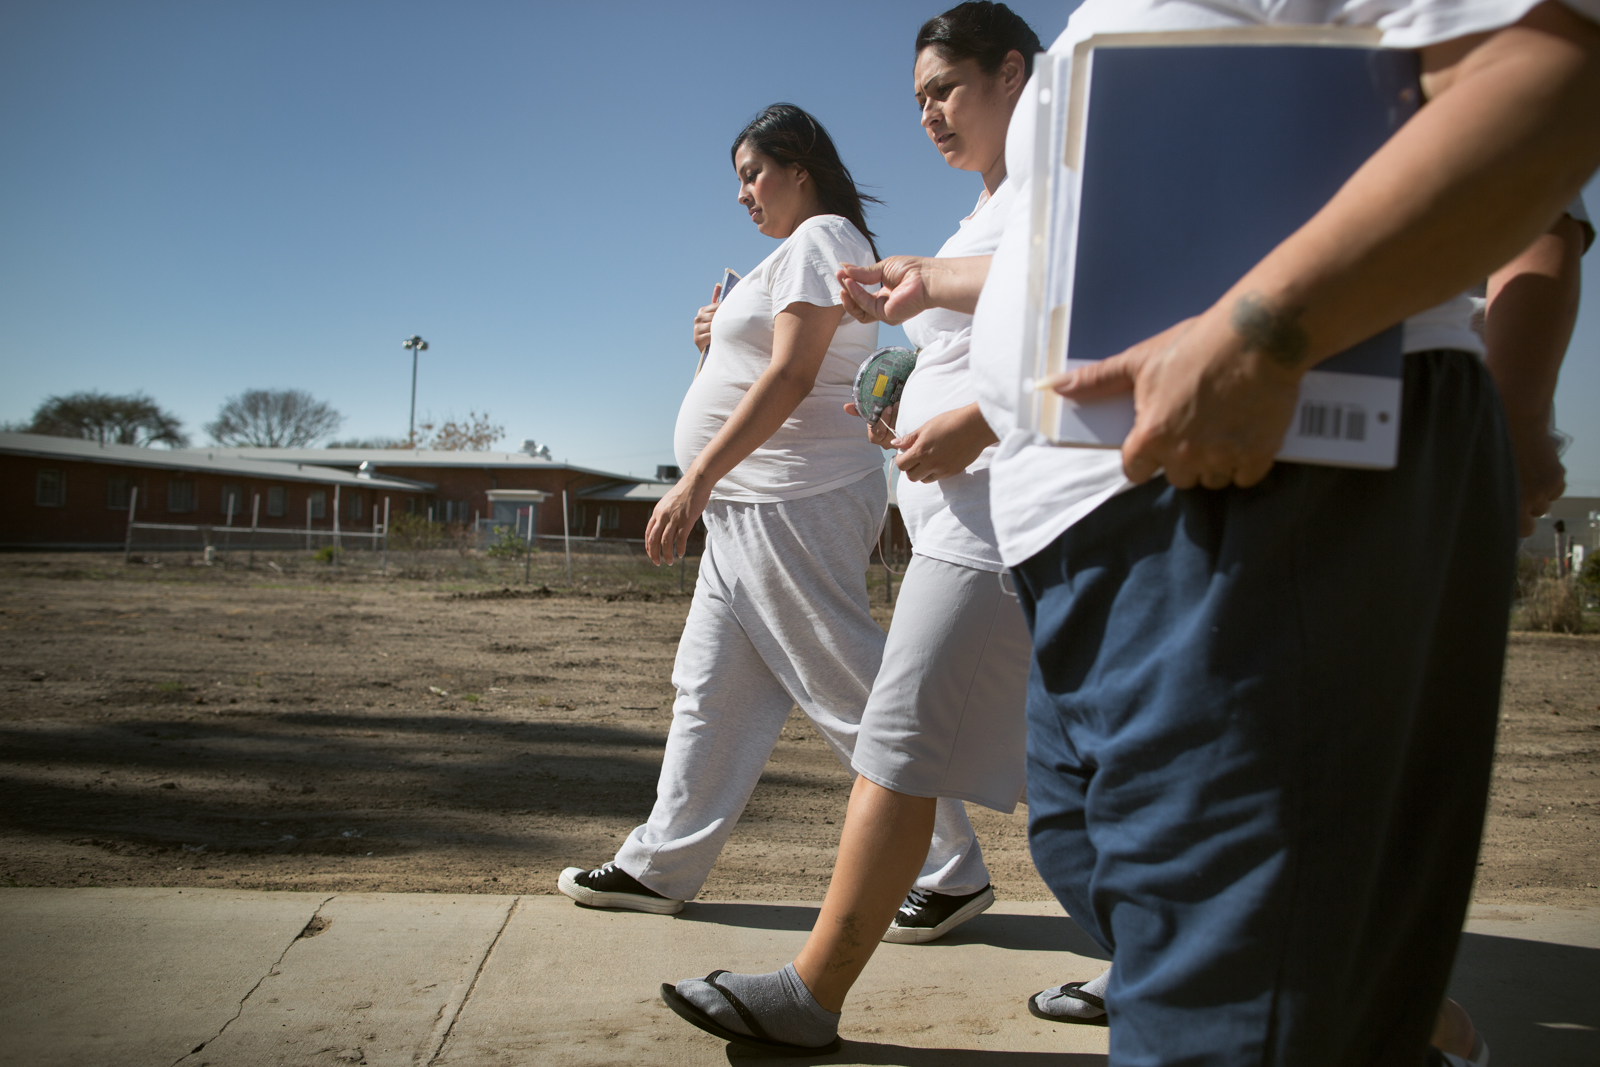 Regina Zodiacal walks with other inmates at the California Institution for Women in Chino, Calif. on March 12th, 2013. Zodiacal, pictured at seven months into her pregnancy, learned she was pregnant when she was awaiting her trial in the Santa Ana county jail. 'It was kind of a shocker to me,' Zodiacal said. 'I used to always think I was never going to be that girl to go to prison and give birth,' she said.